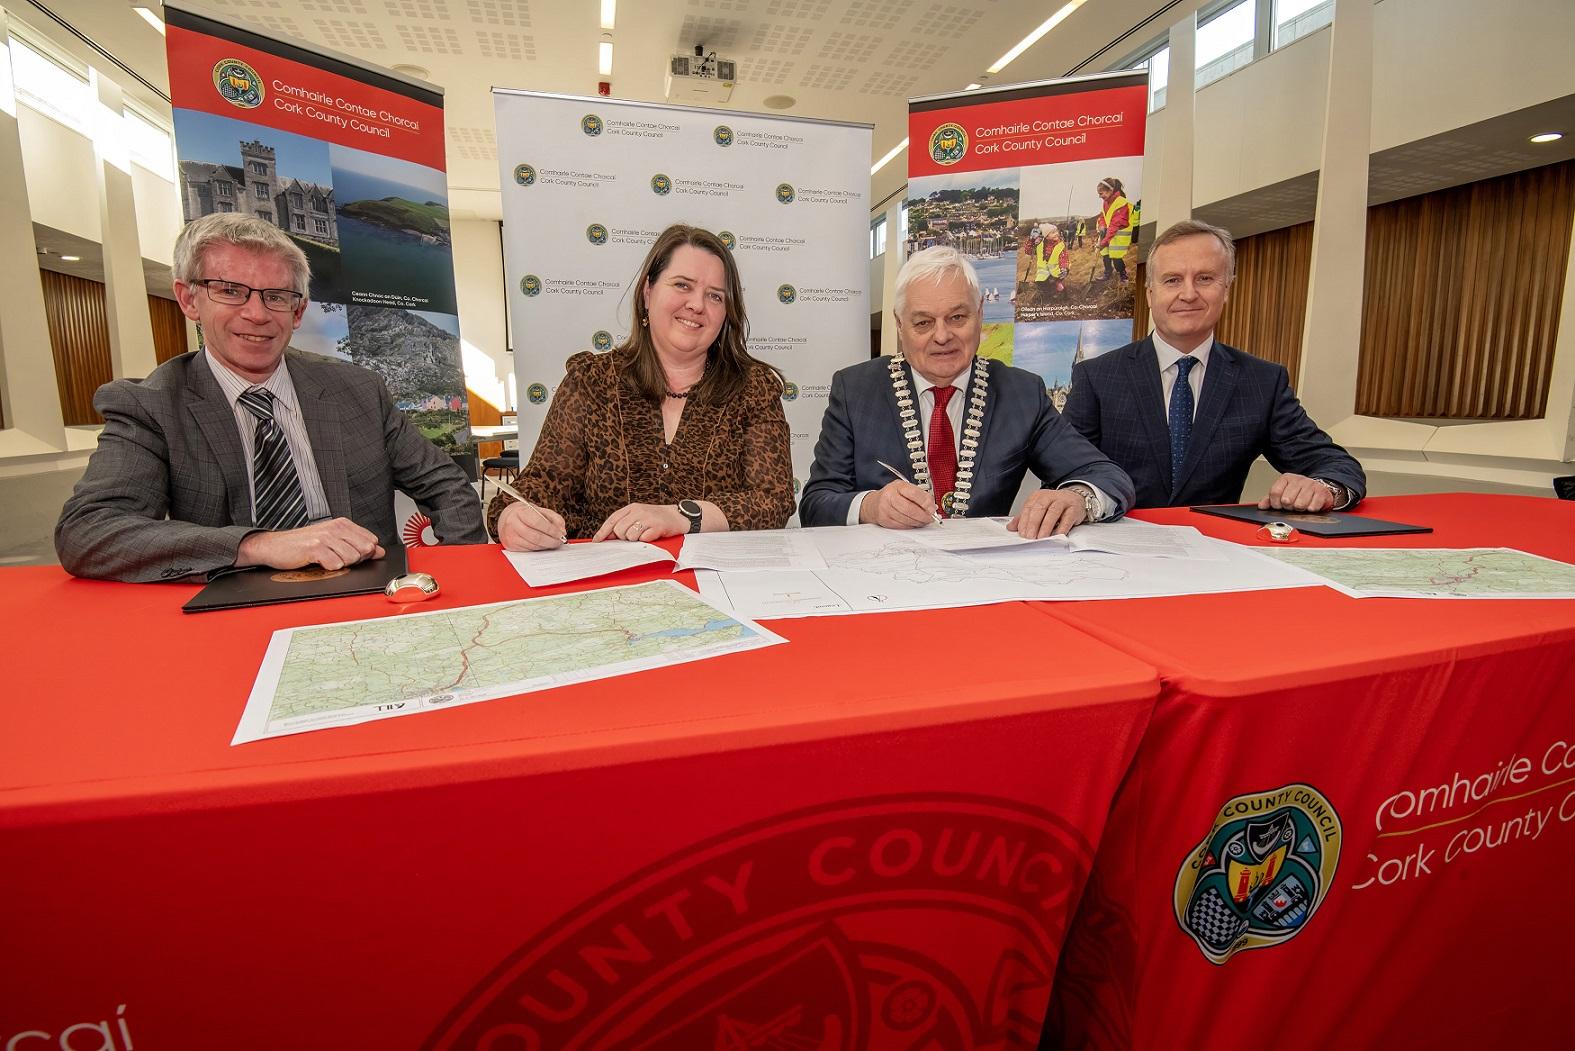 Four people signing a contract at a table with Cork County Council branding in the background.